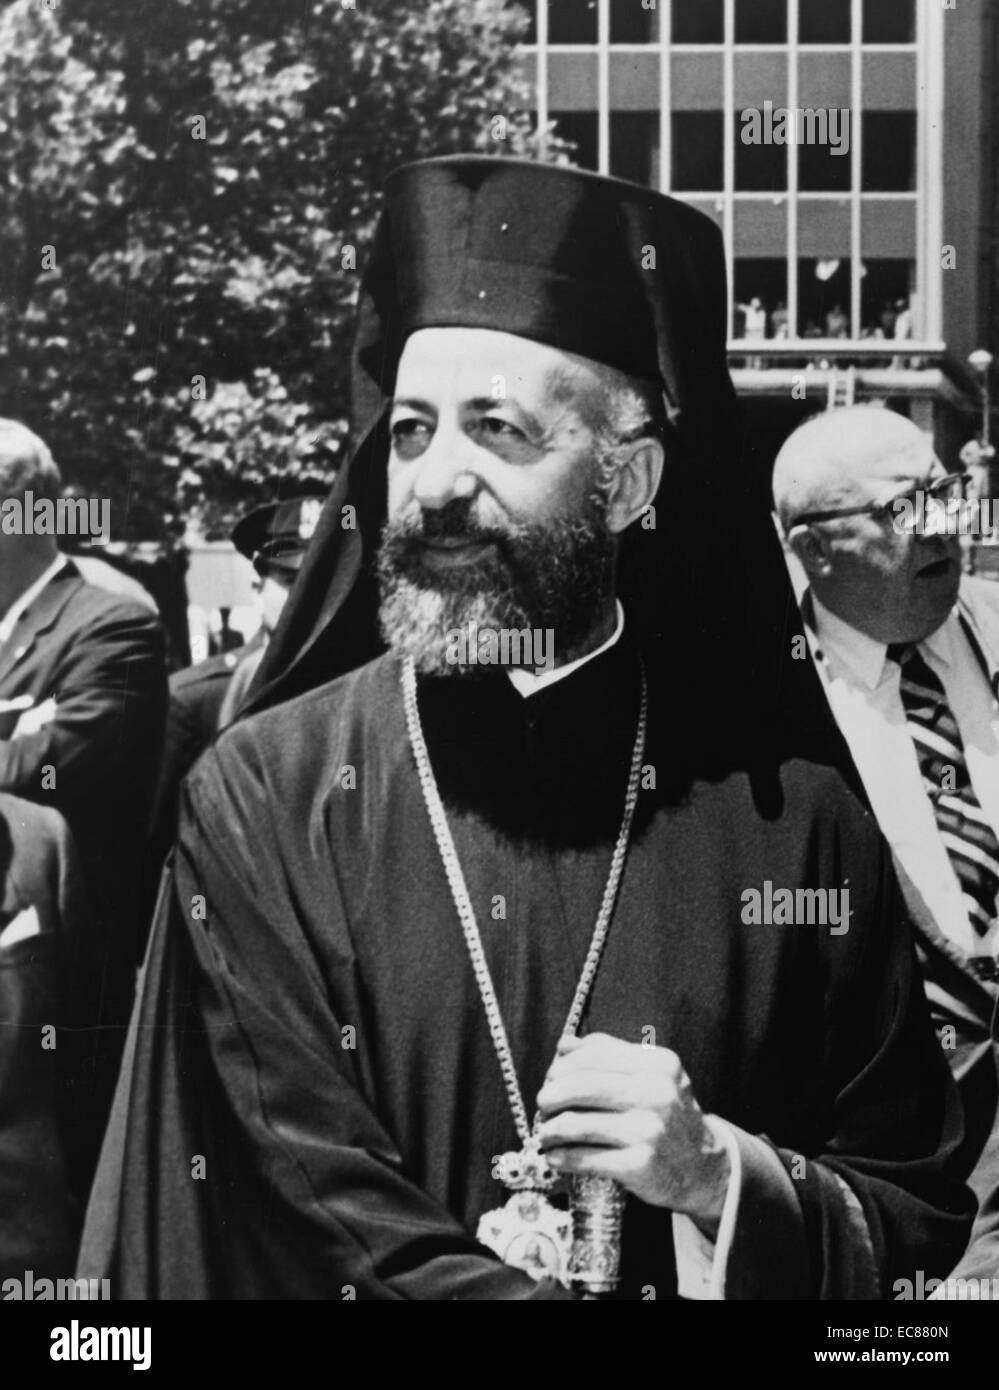 Photograph of Makarios III (1913-1977) archbishop and primate of the Orthodox Church of Cyprus and the first President of the Republic of Cyprus. Dated 1970 Stock Photo